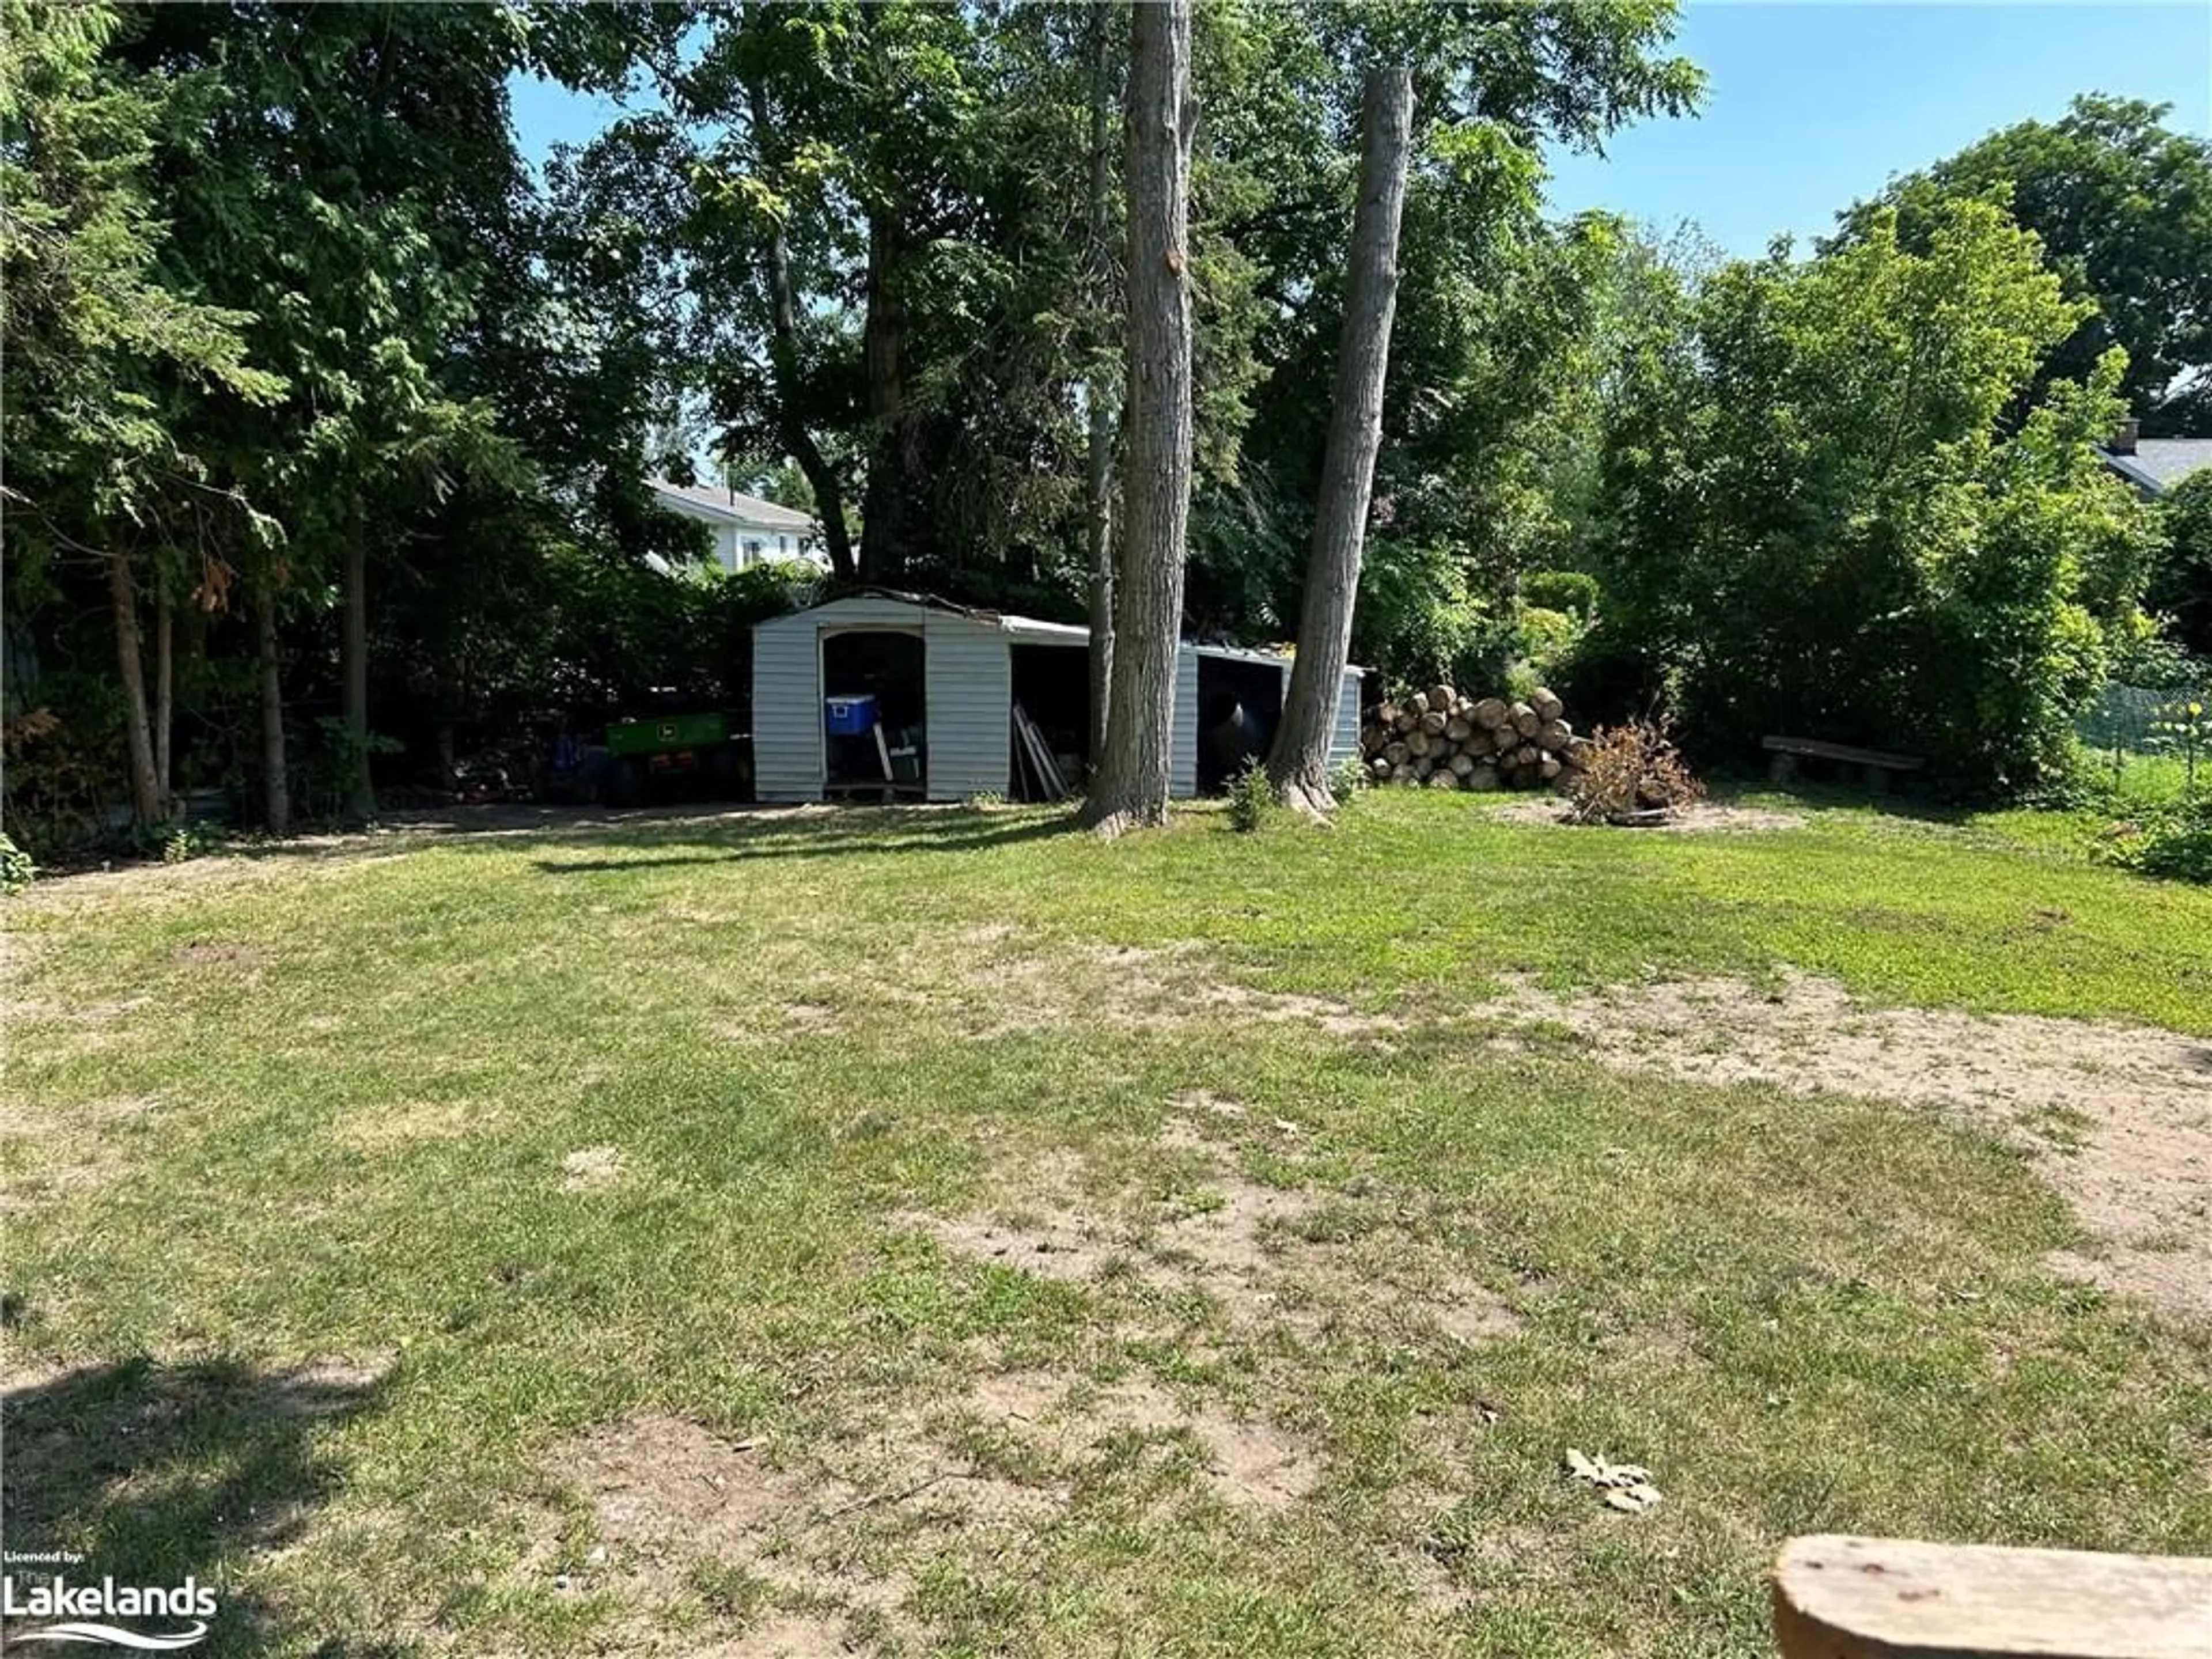 Shed for 655 Fourth Ave, Port McNicoll Ontario L0K 1R0